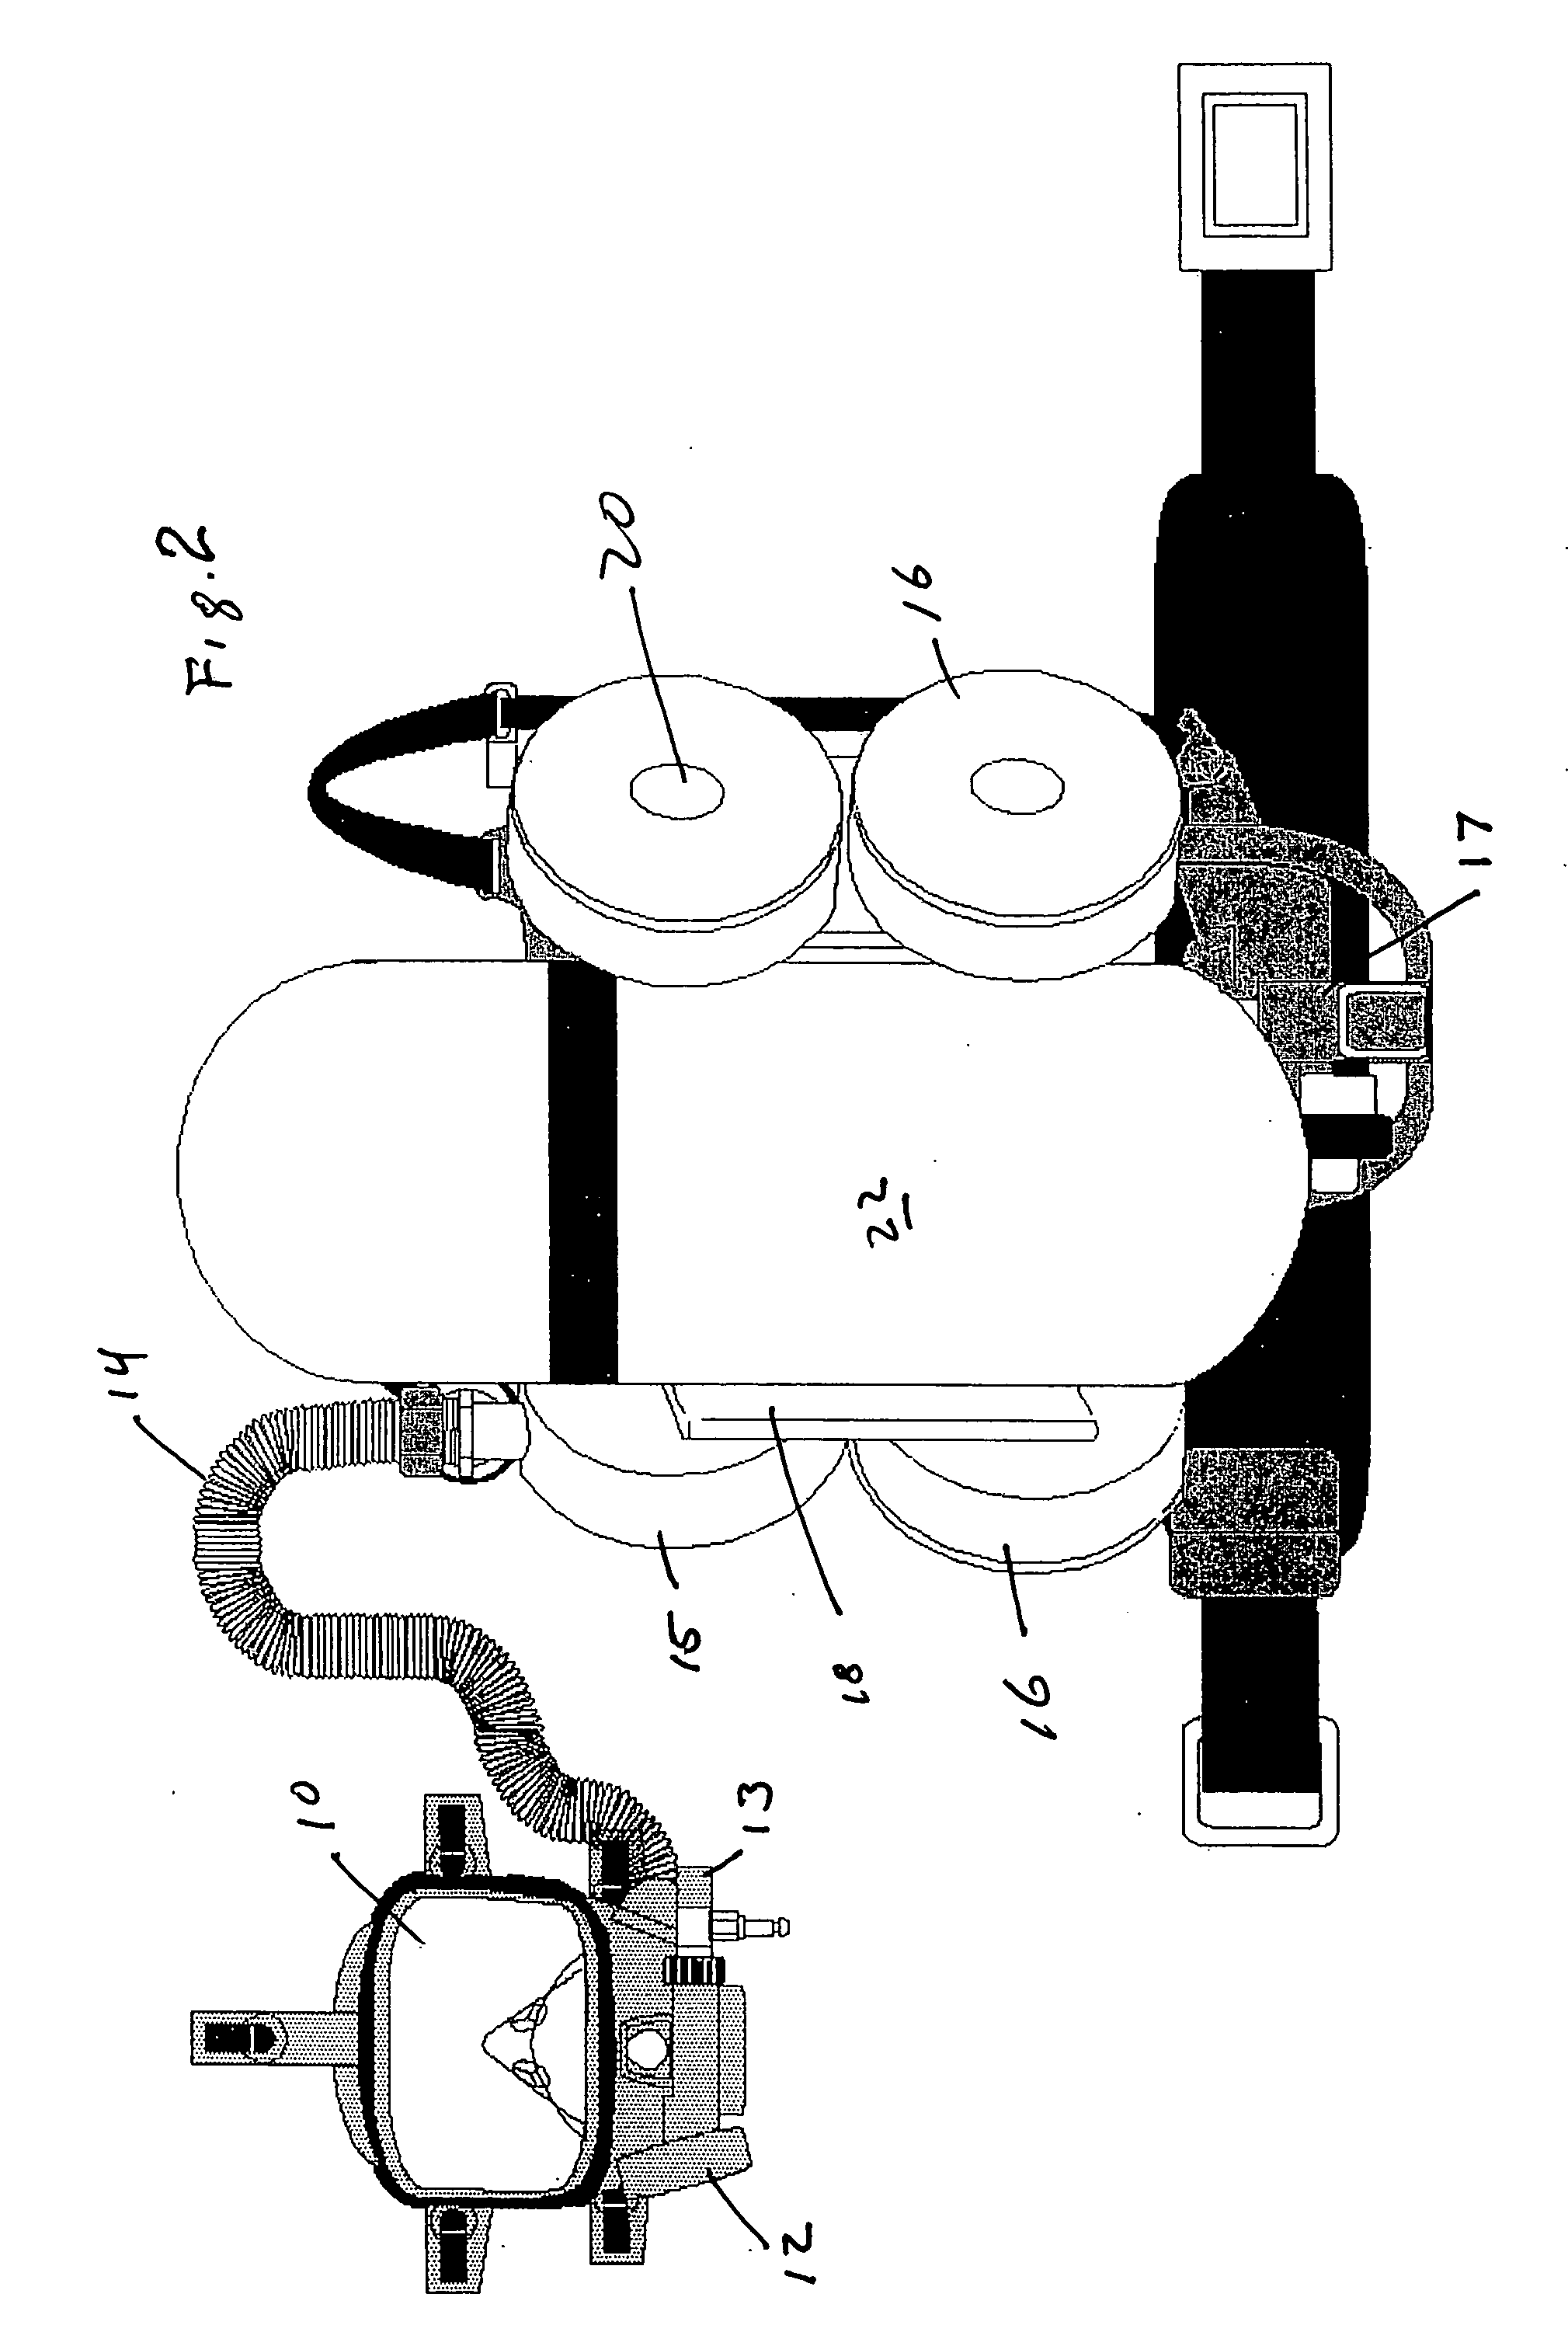 Powered air purifying respirator system and self contained breathing apparatus